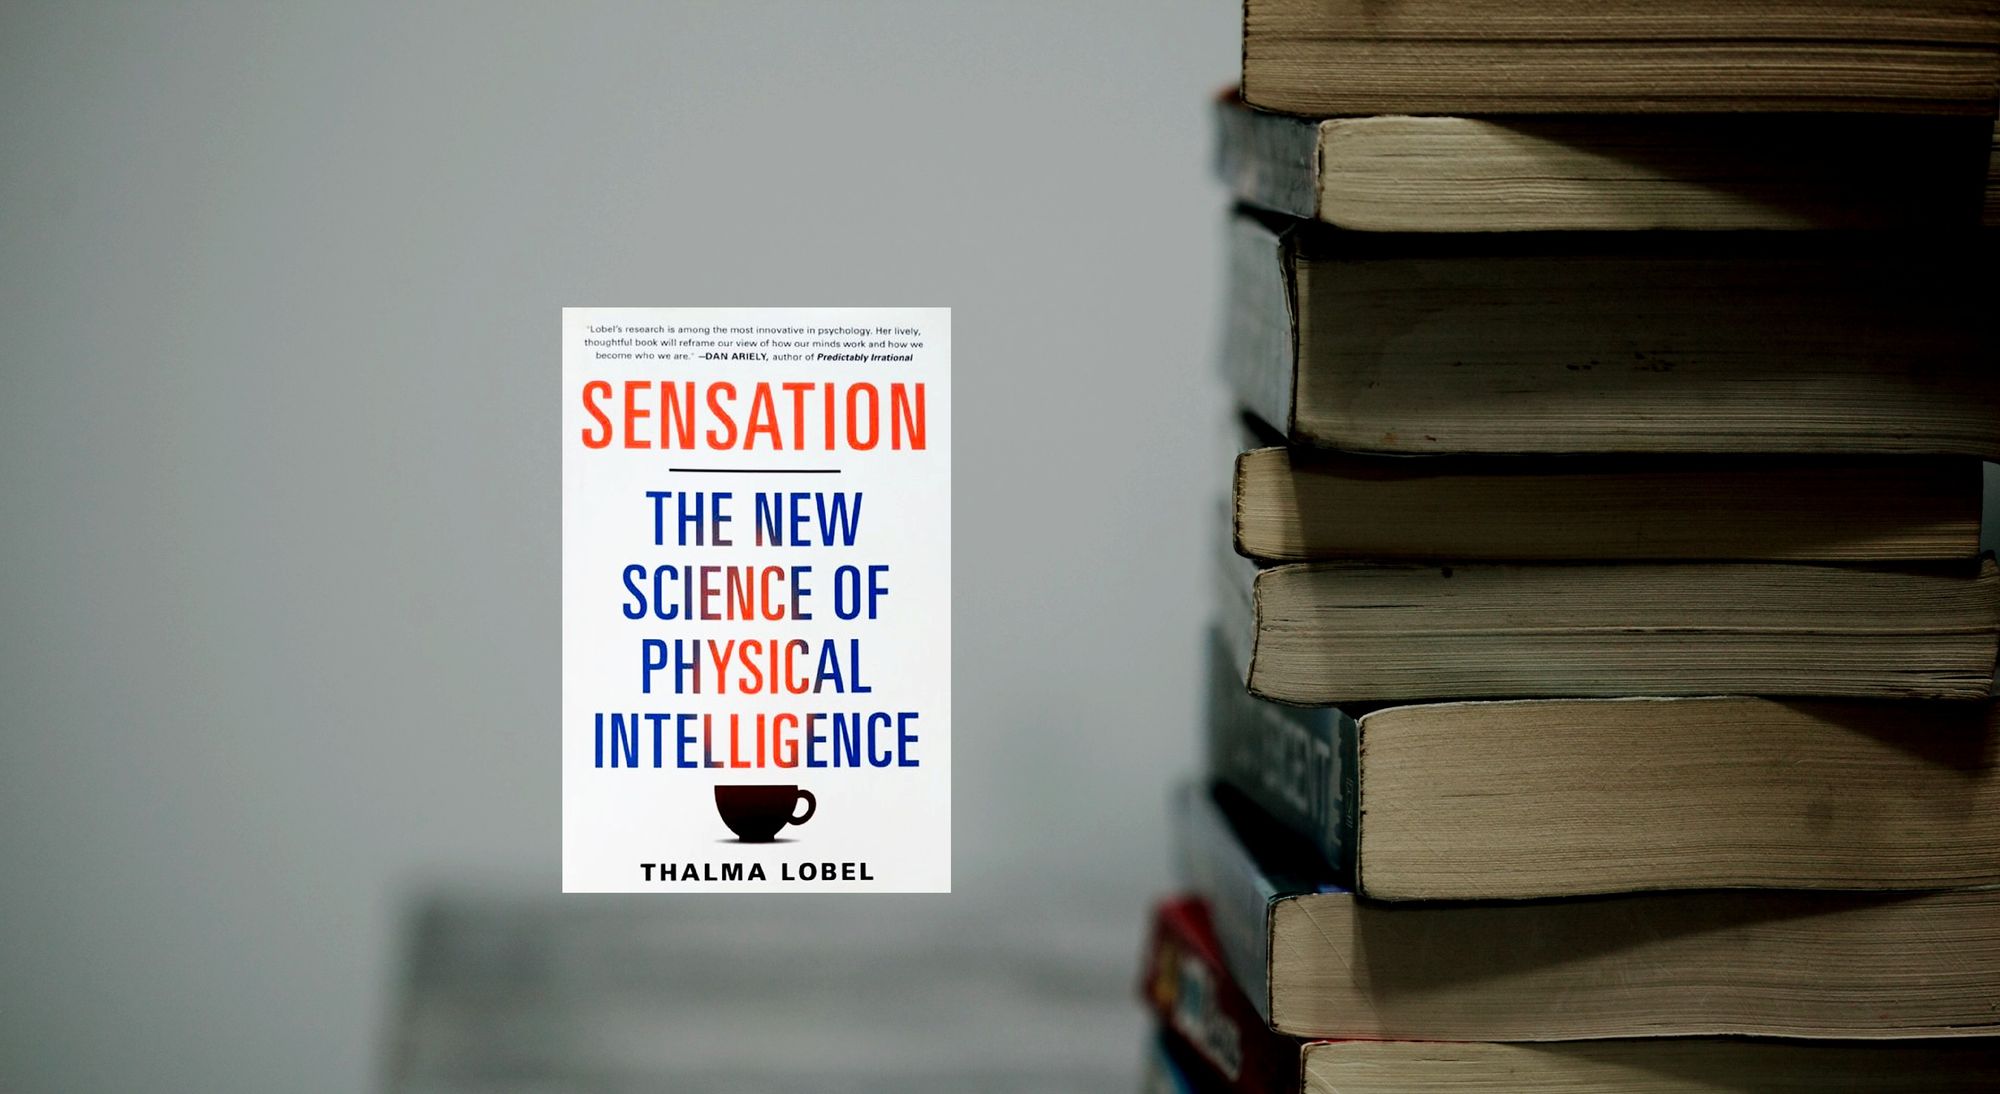 Sensation: The New Science of Physical Intelligence - Book Summary